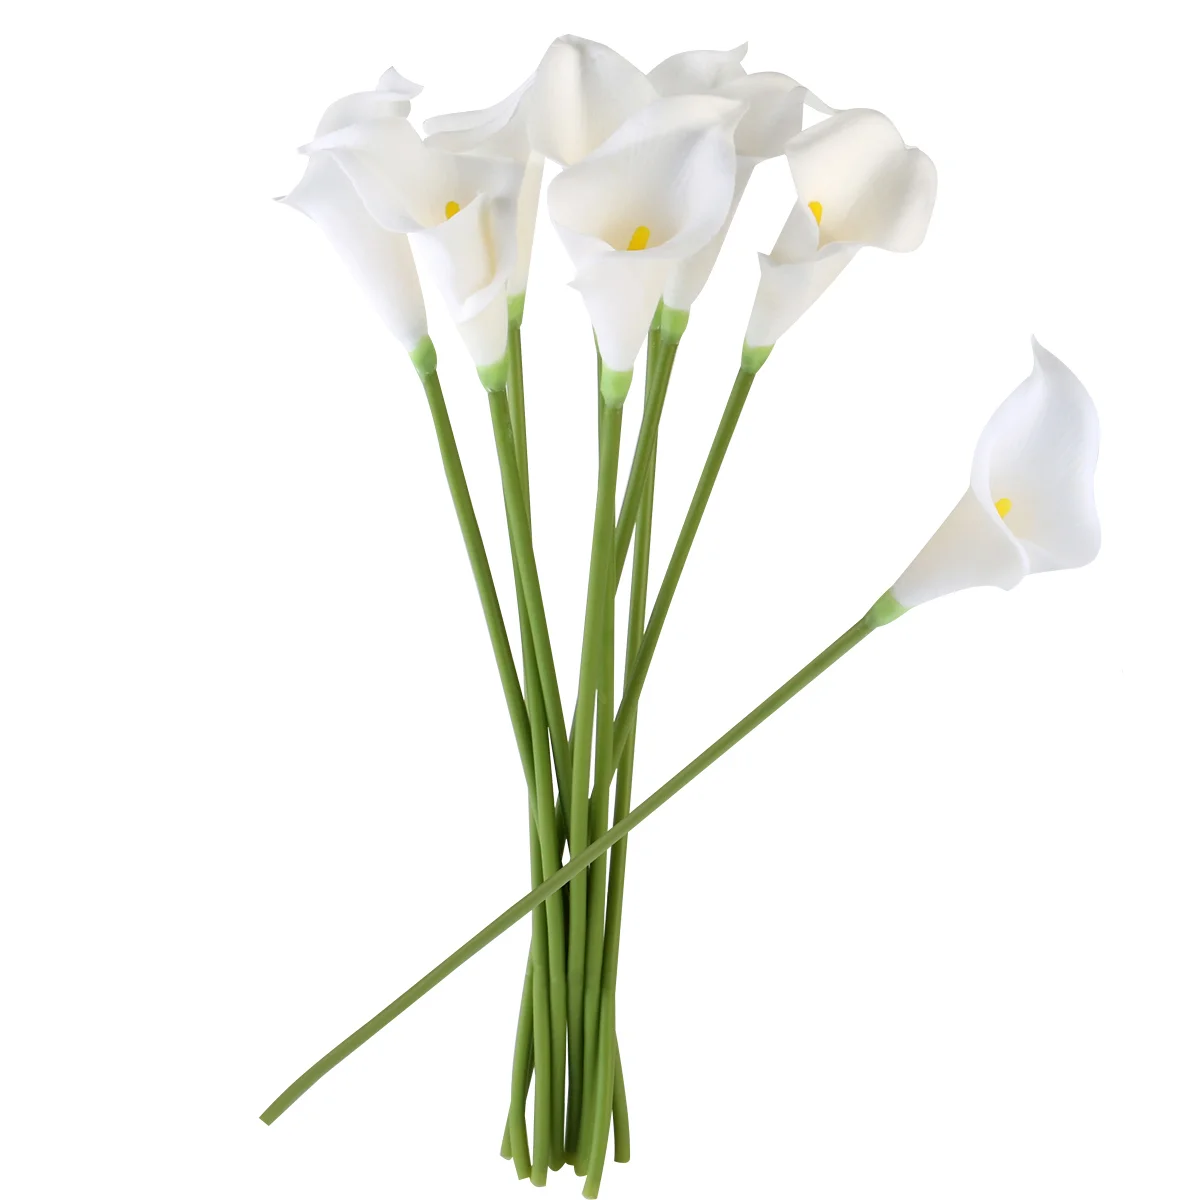 

ULTNICE 10pcs Elegant Lifelike Real Touch Artificial PU Calla Lily Flower Bouquets Bridal Wedding Flower Bouquets (White)